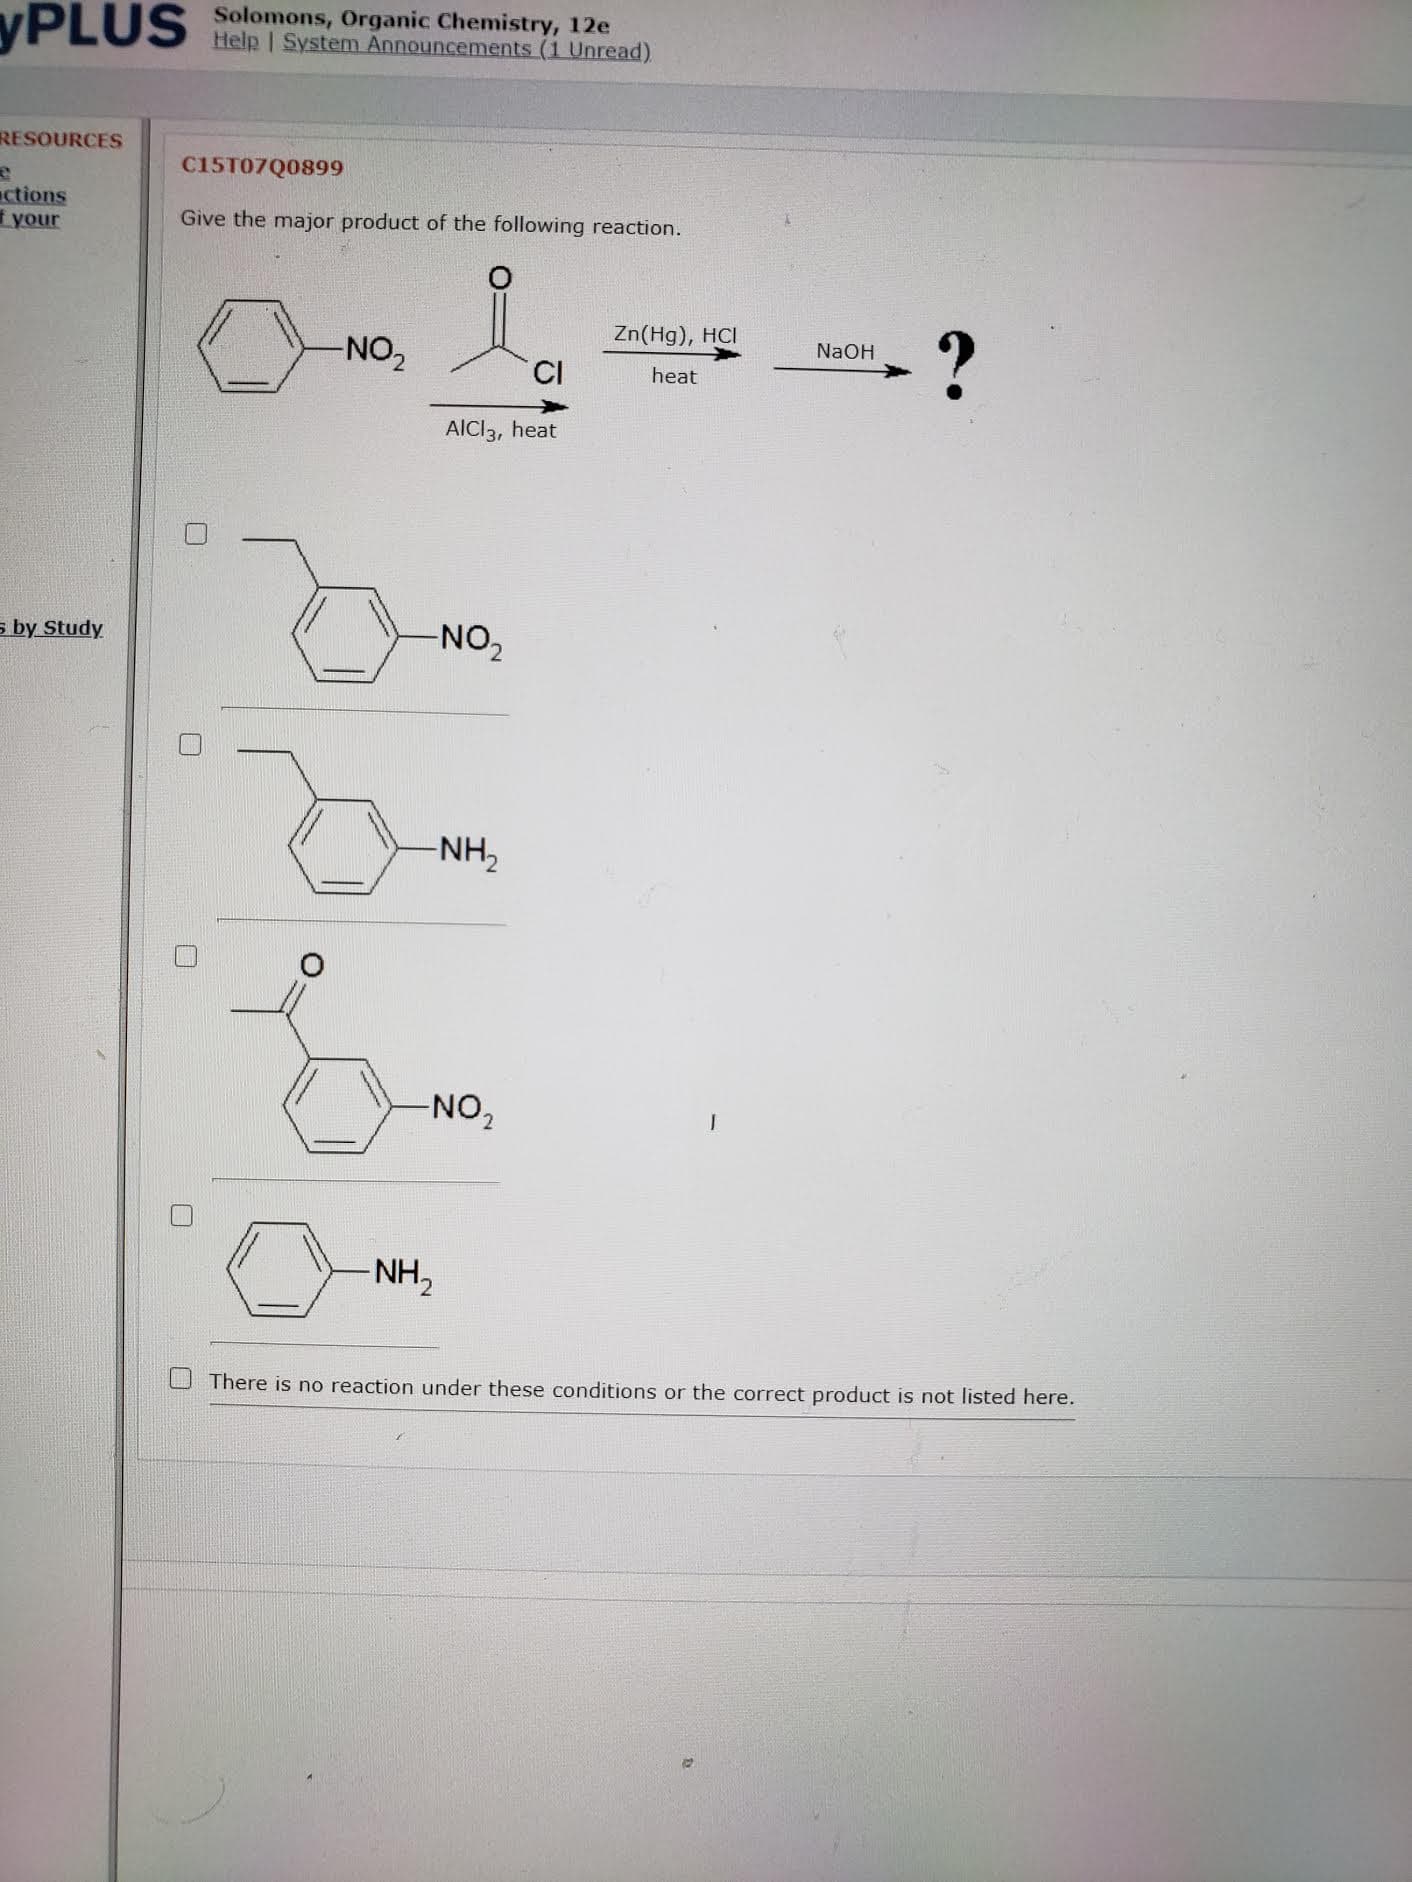 Give the major product of the following reaction.
Zn(Hg), HCI
NaOH
NO2
CI
heat
AICI3, heat
-NO,
-NH,
NON
-NH,
There is no reaction under these conditions or the correct product is not listed here.
